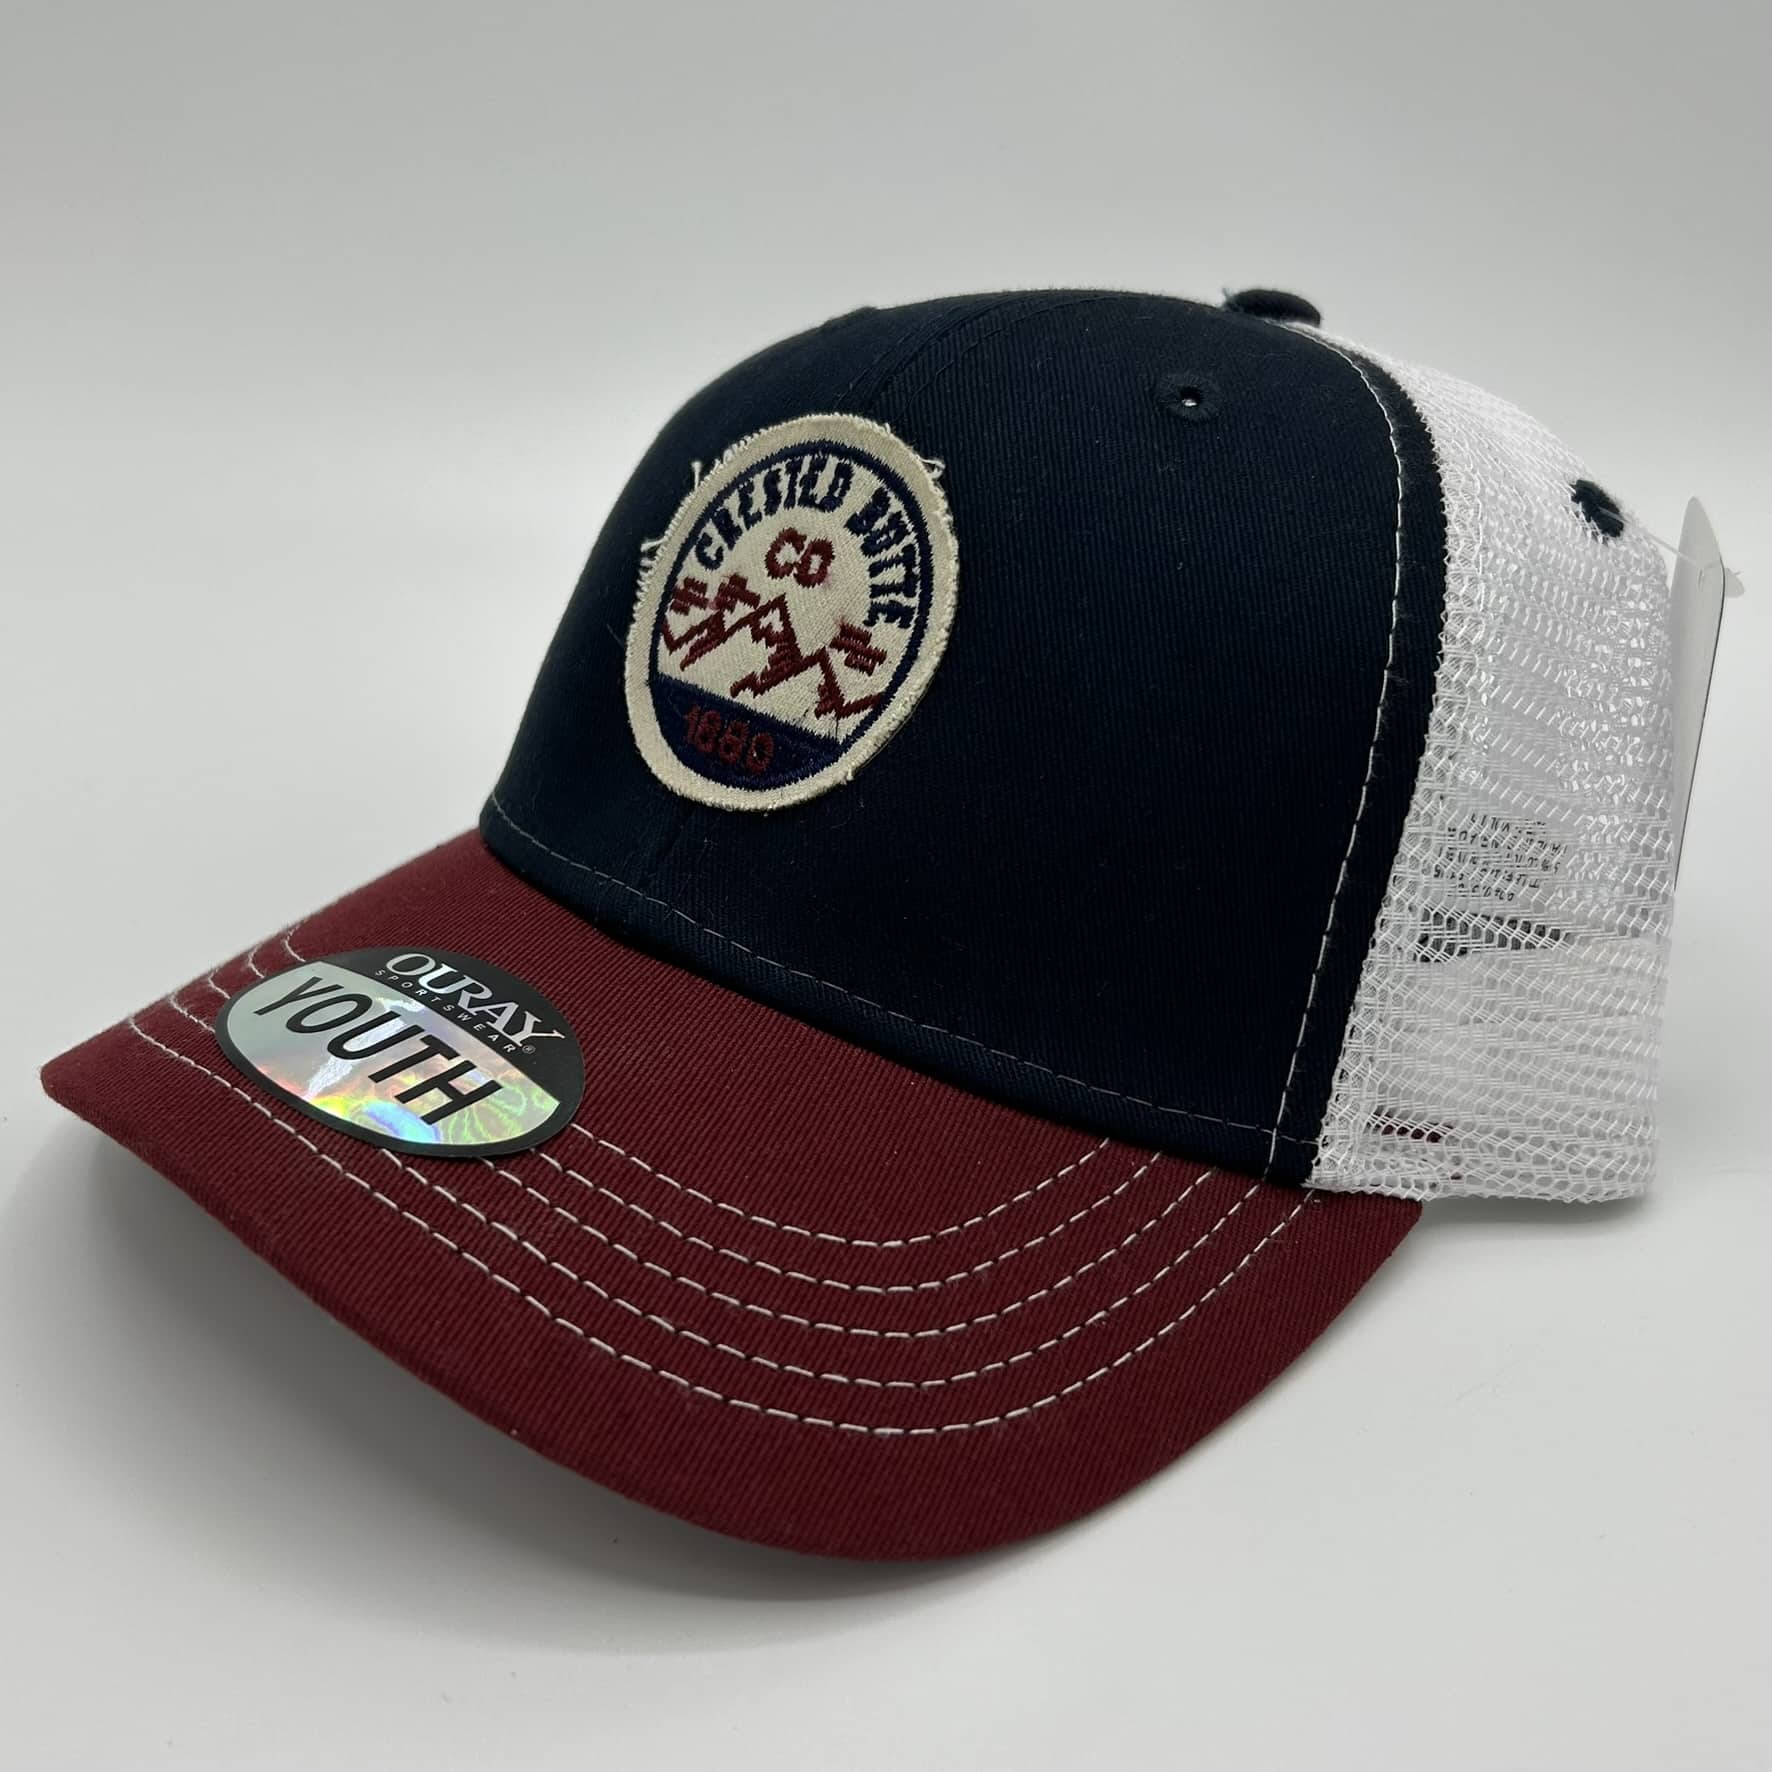 Crested Butte Youth Trucker Hat- Navy/Red